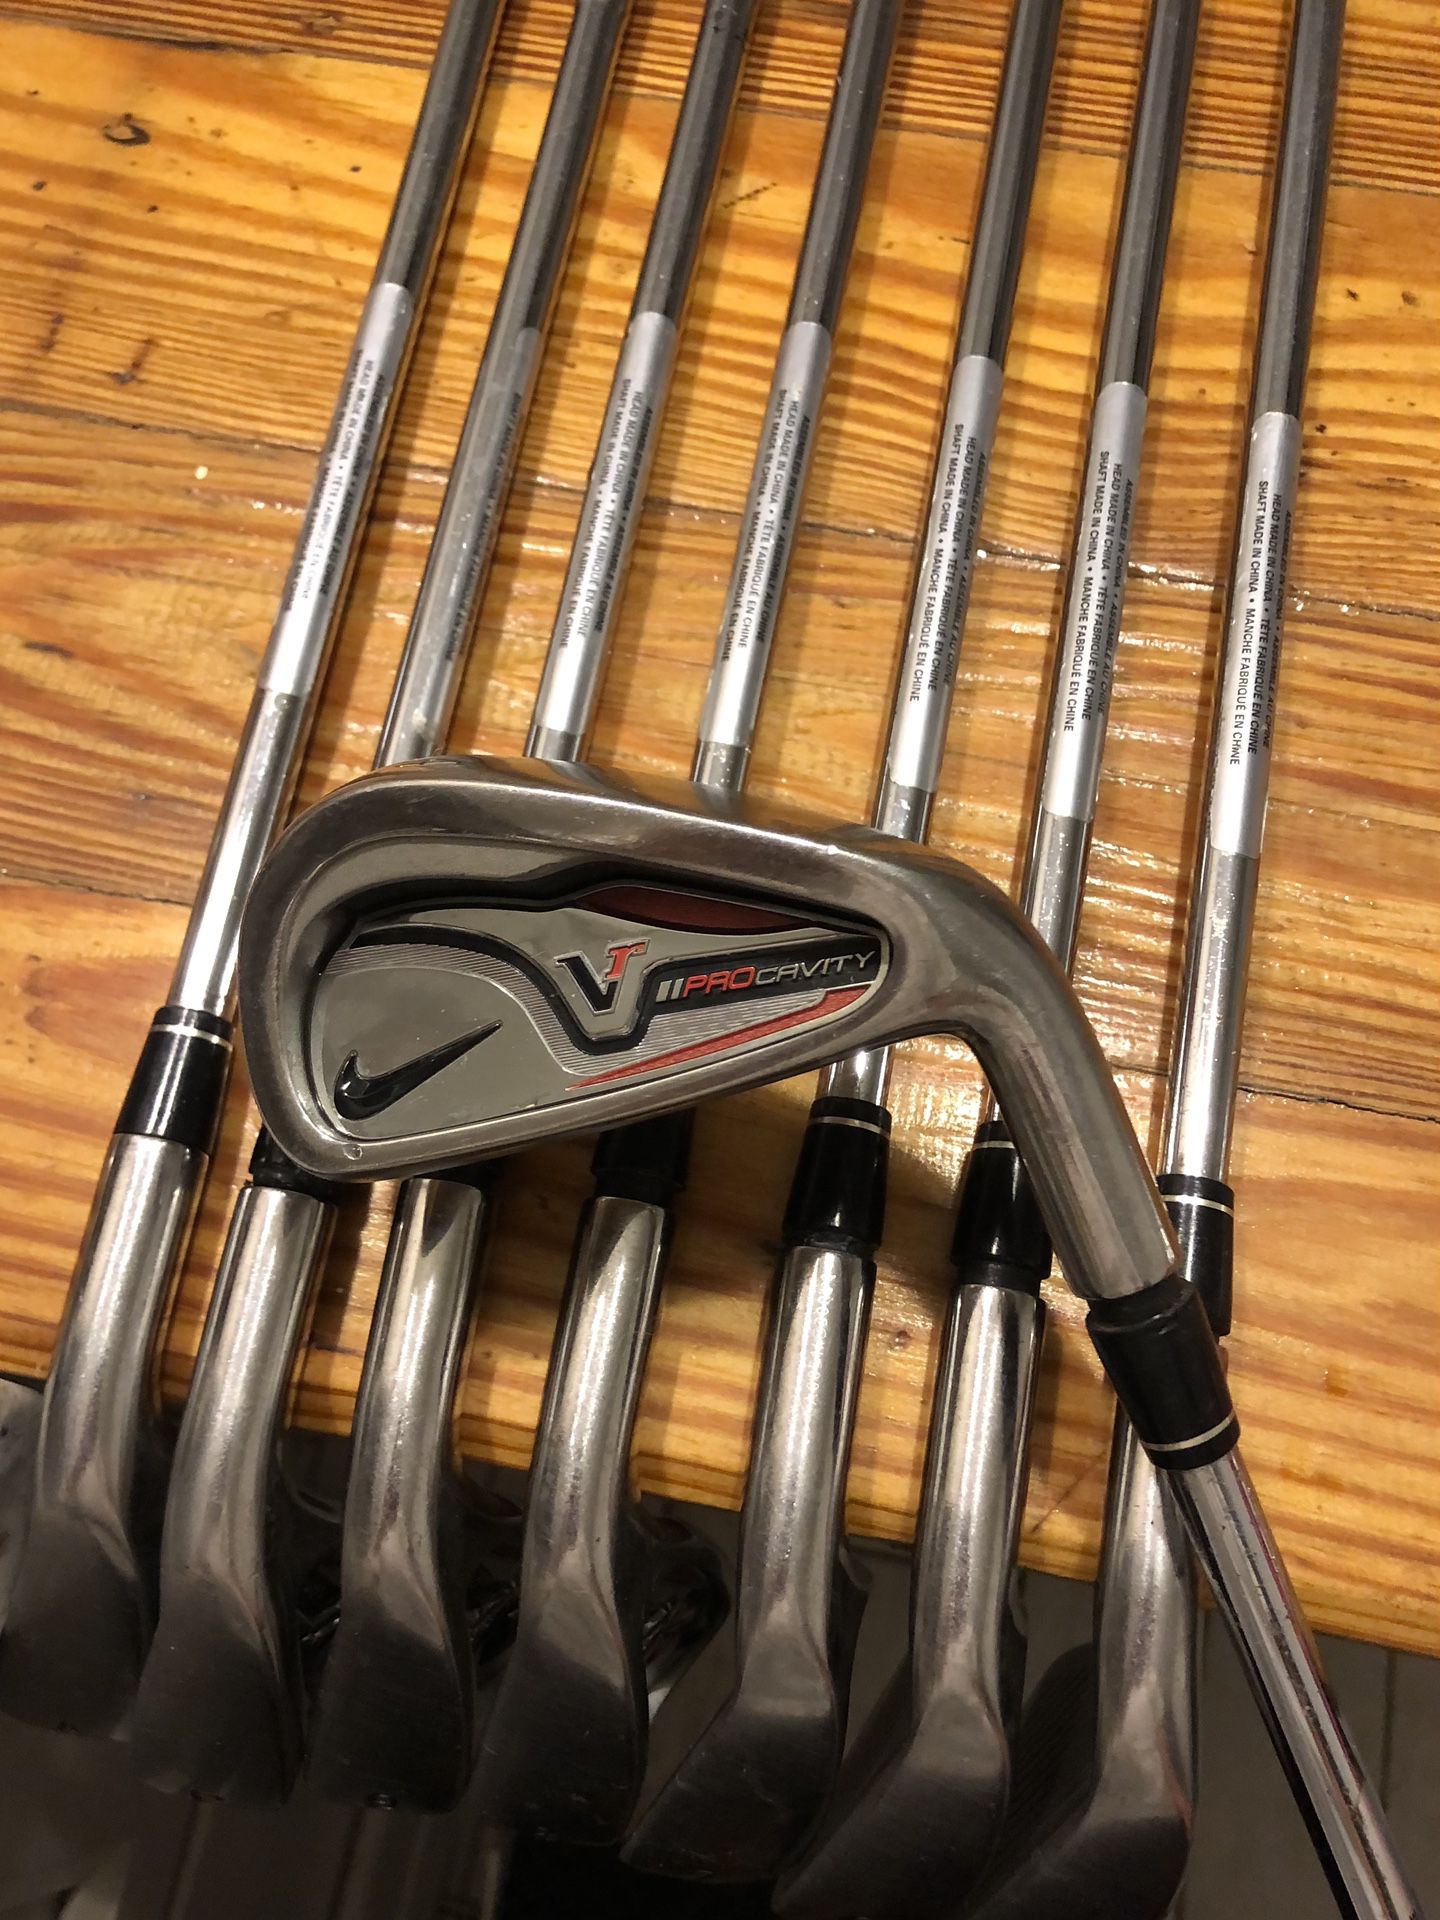 Nike VR Cavity (4-AW) Irons - Excellent Condition Golf Clubs